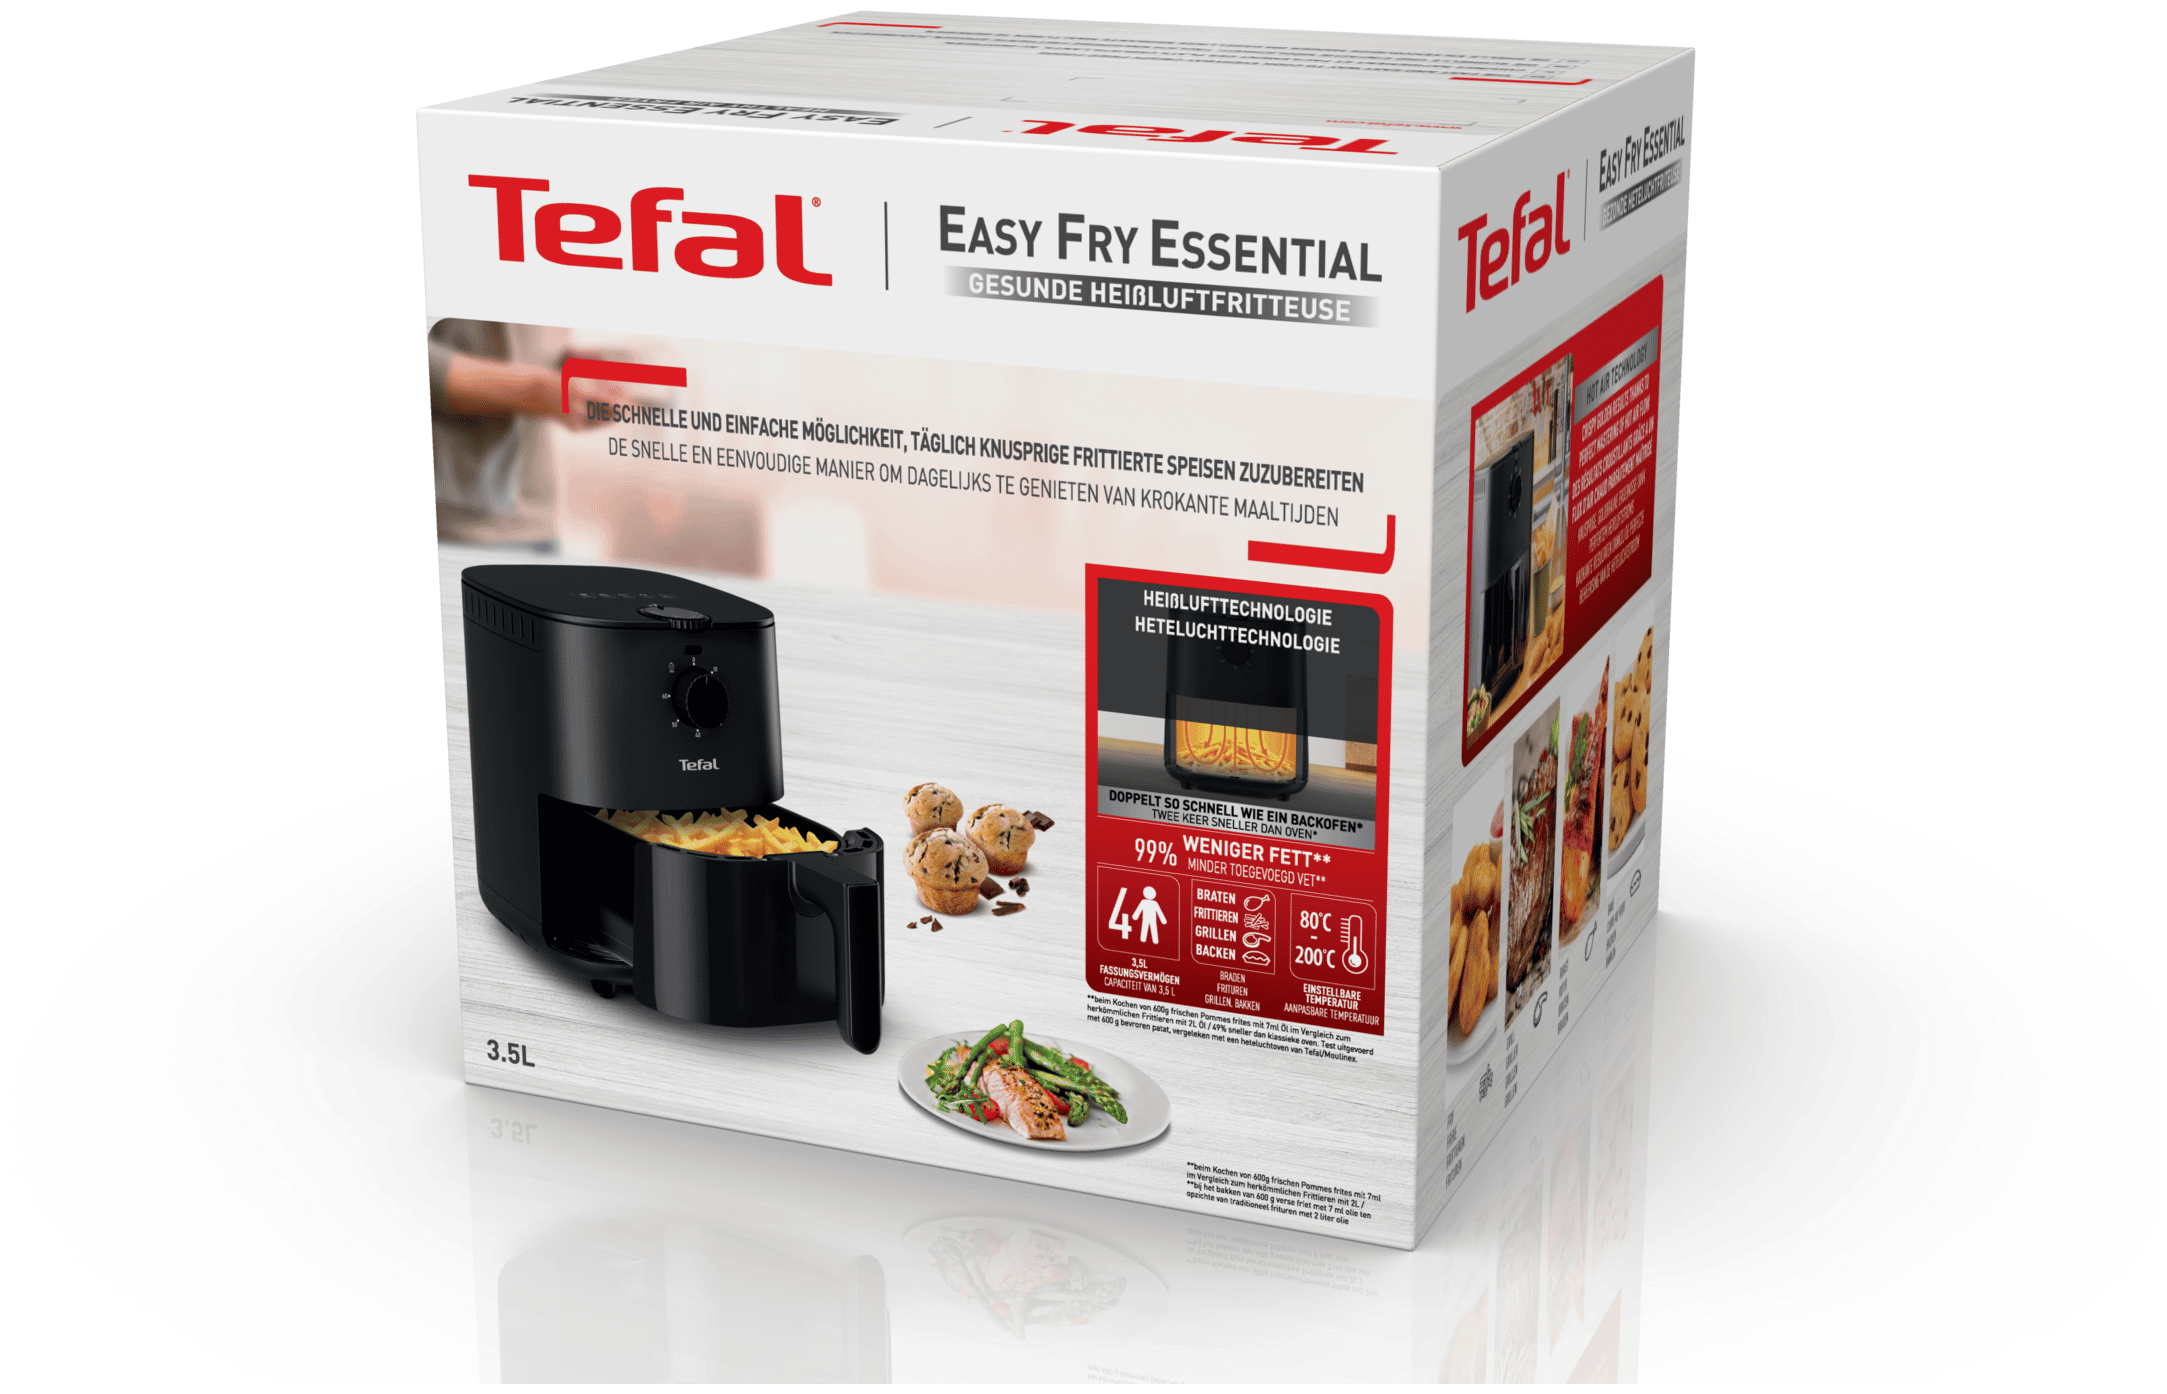 Tefal Easy Fry Essential 3,5 L EY1308 bei Boomstore